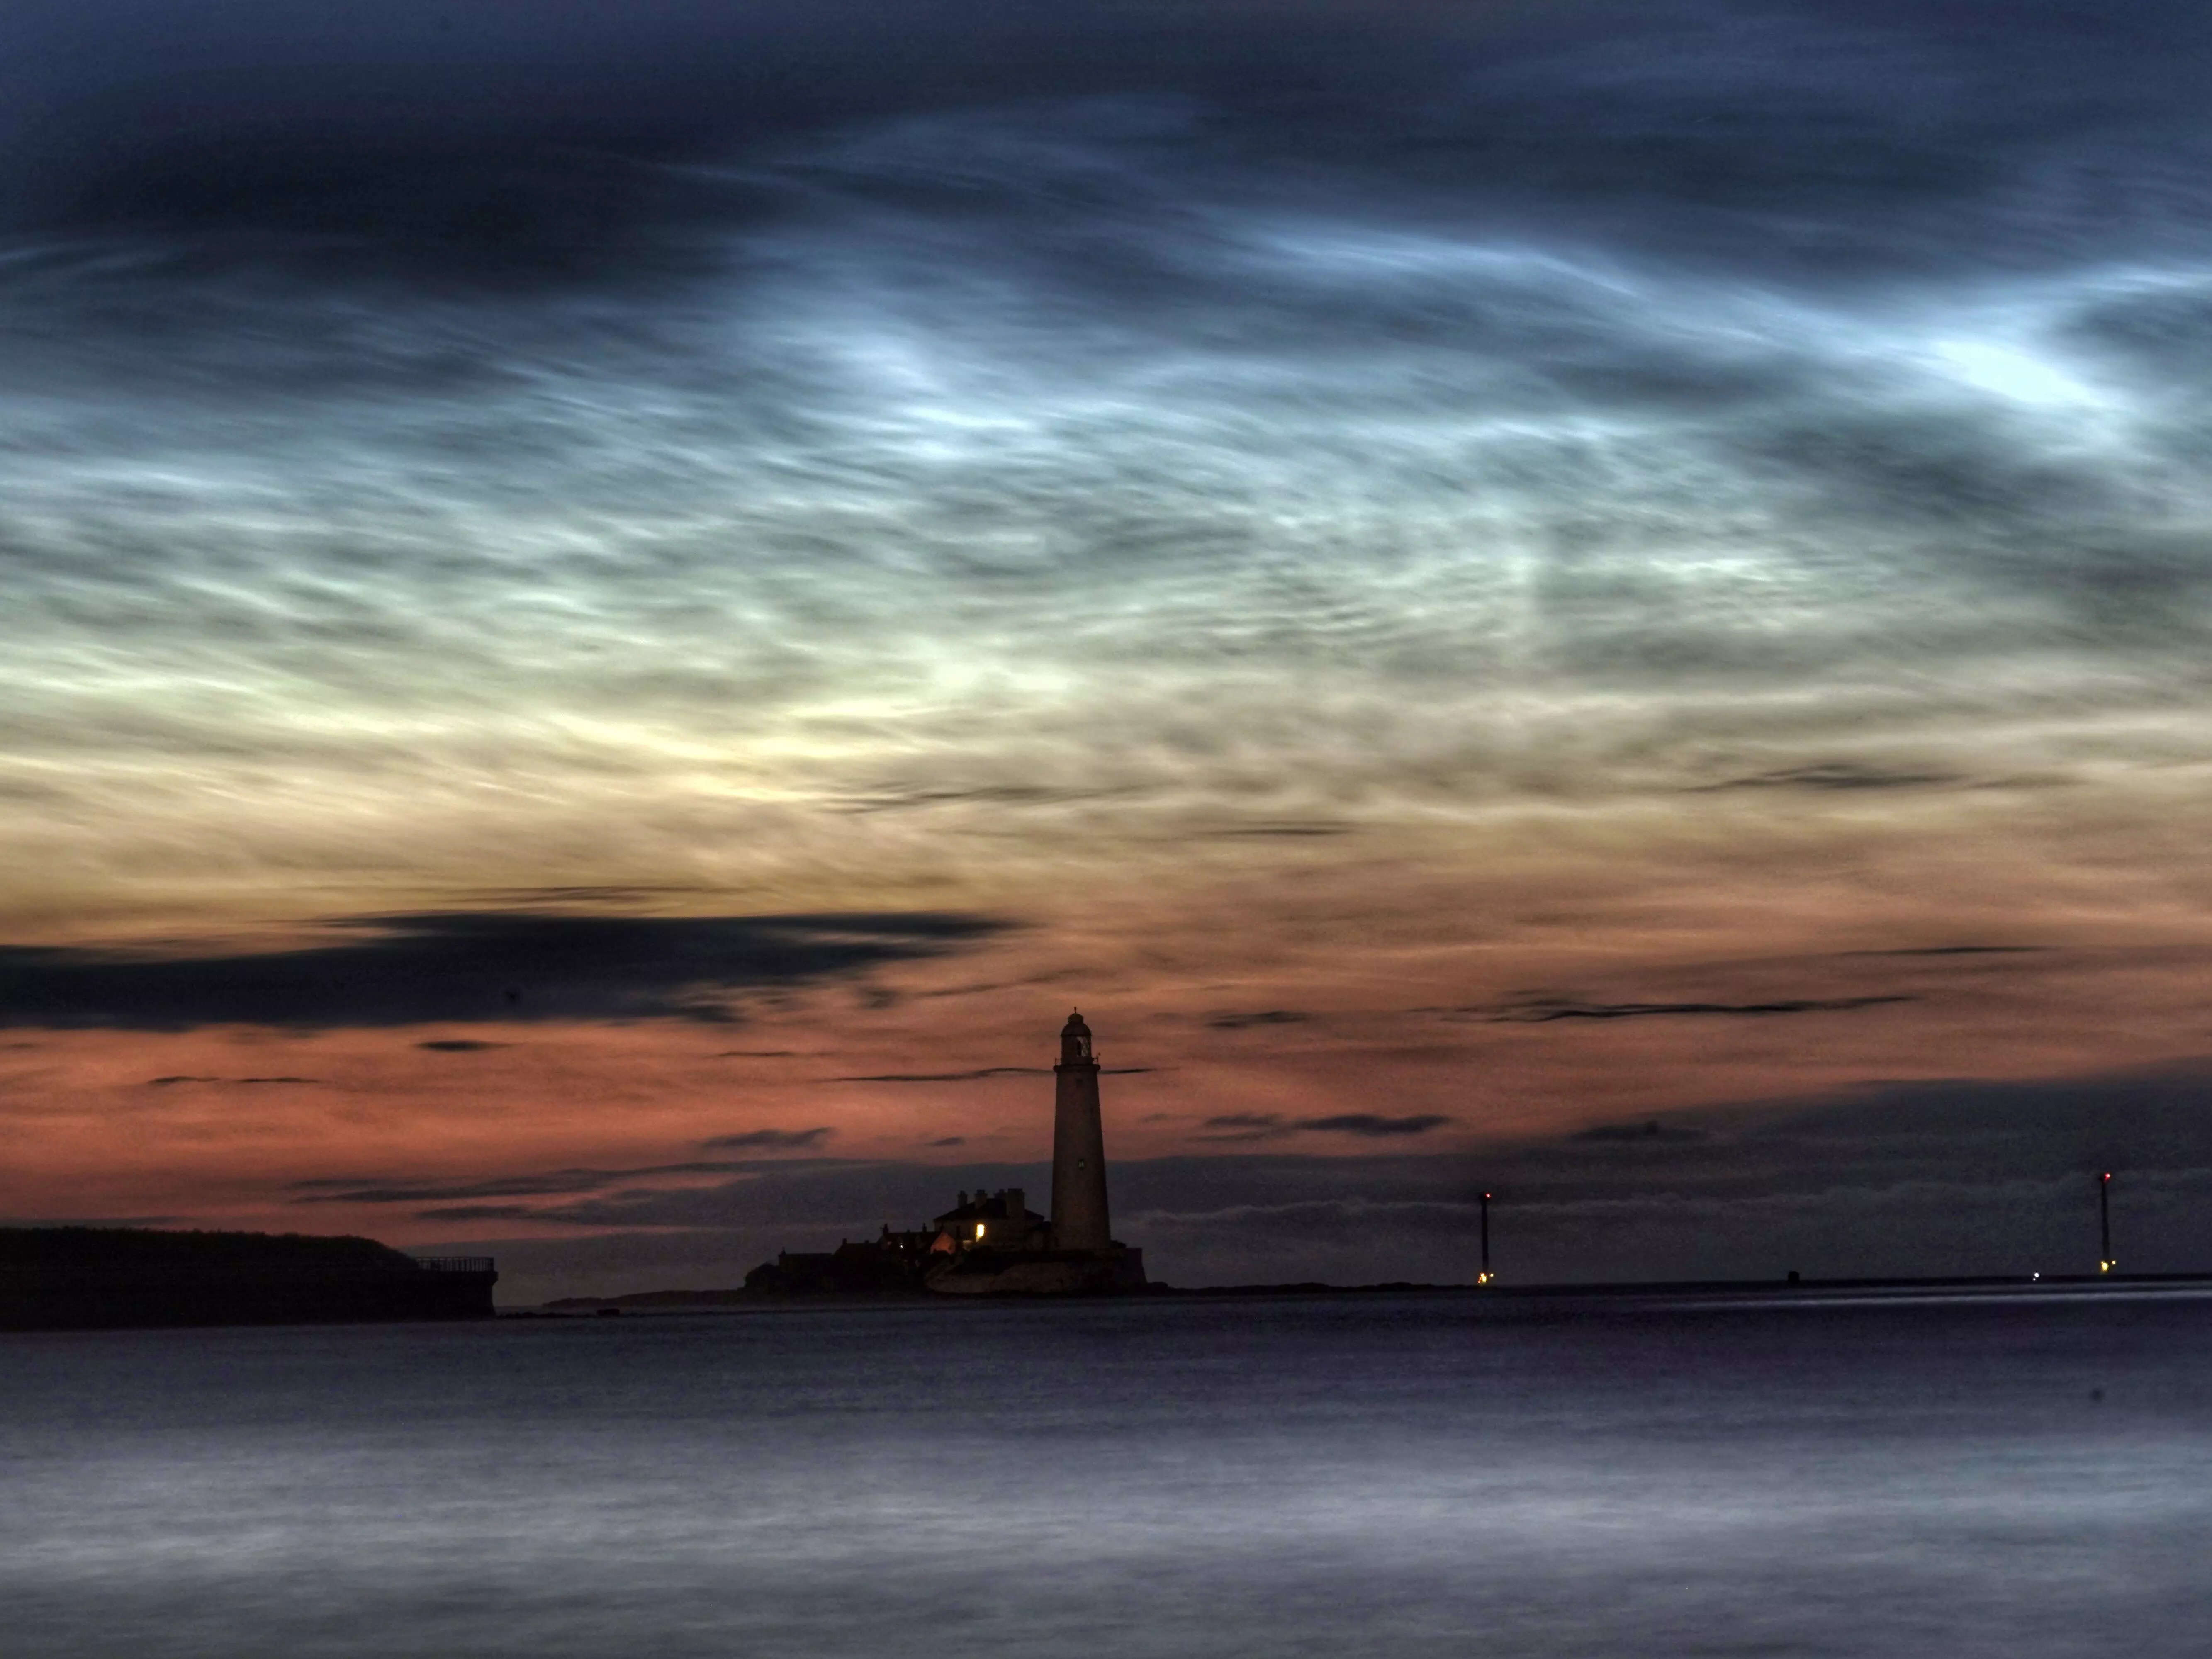 Highest, coldest, and rarest clouds on Earth are returning- How to view the strange "noctilucent clouds"